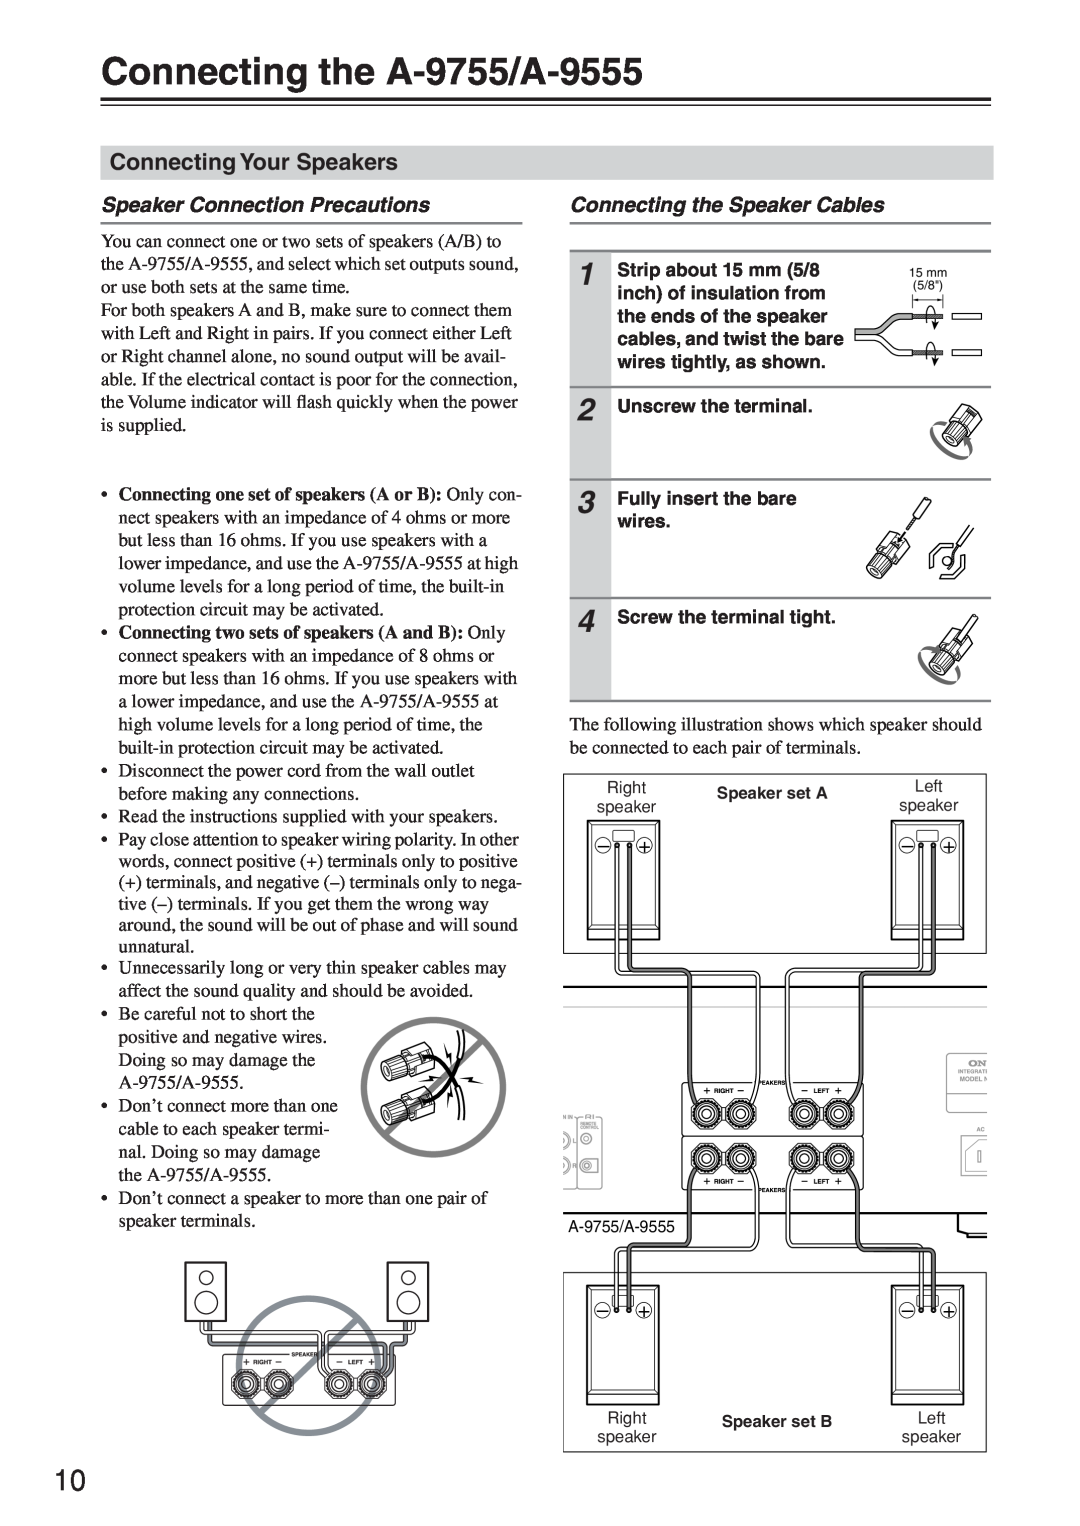 Onkyo instruction manual Connecting the A-9755/A-9555, Connecting Your Speakers, Speaker Connection Precautions 